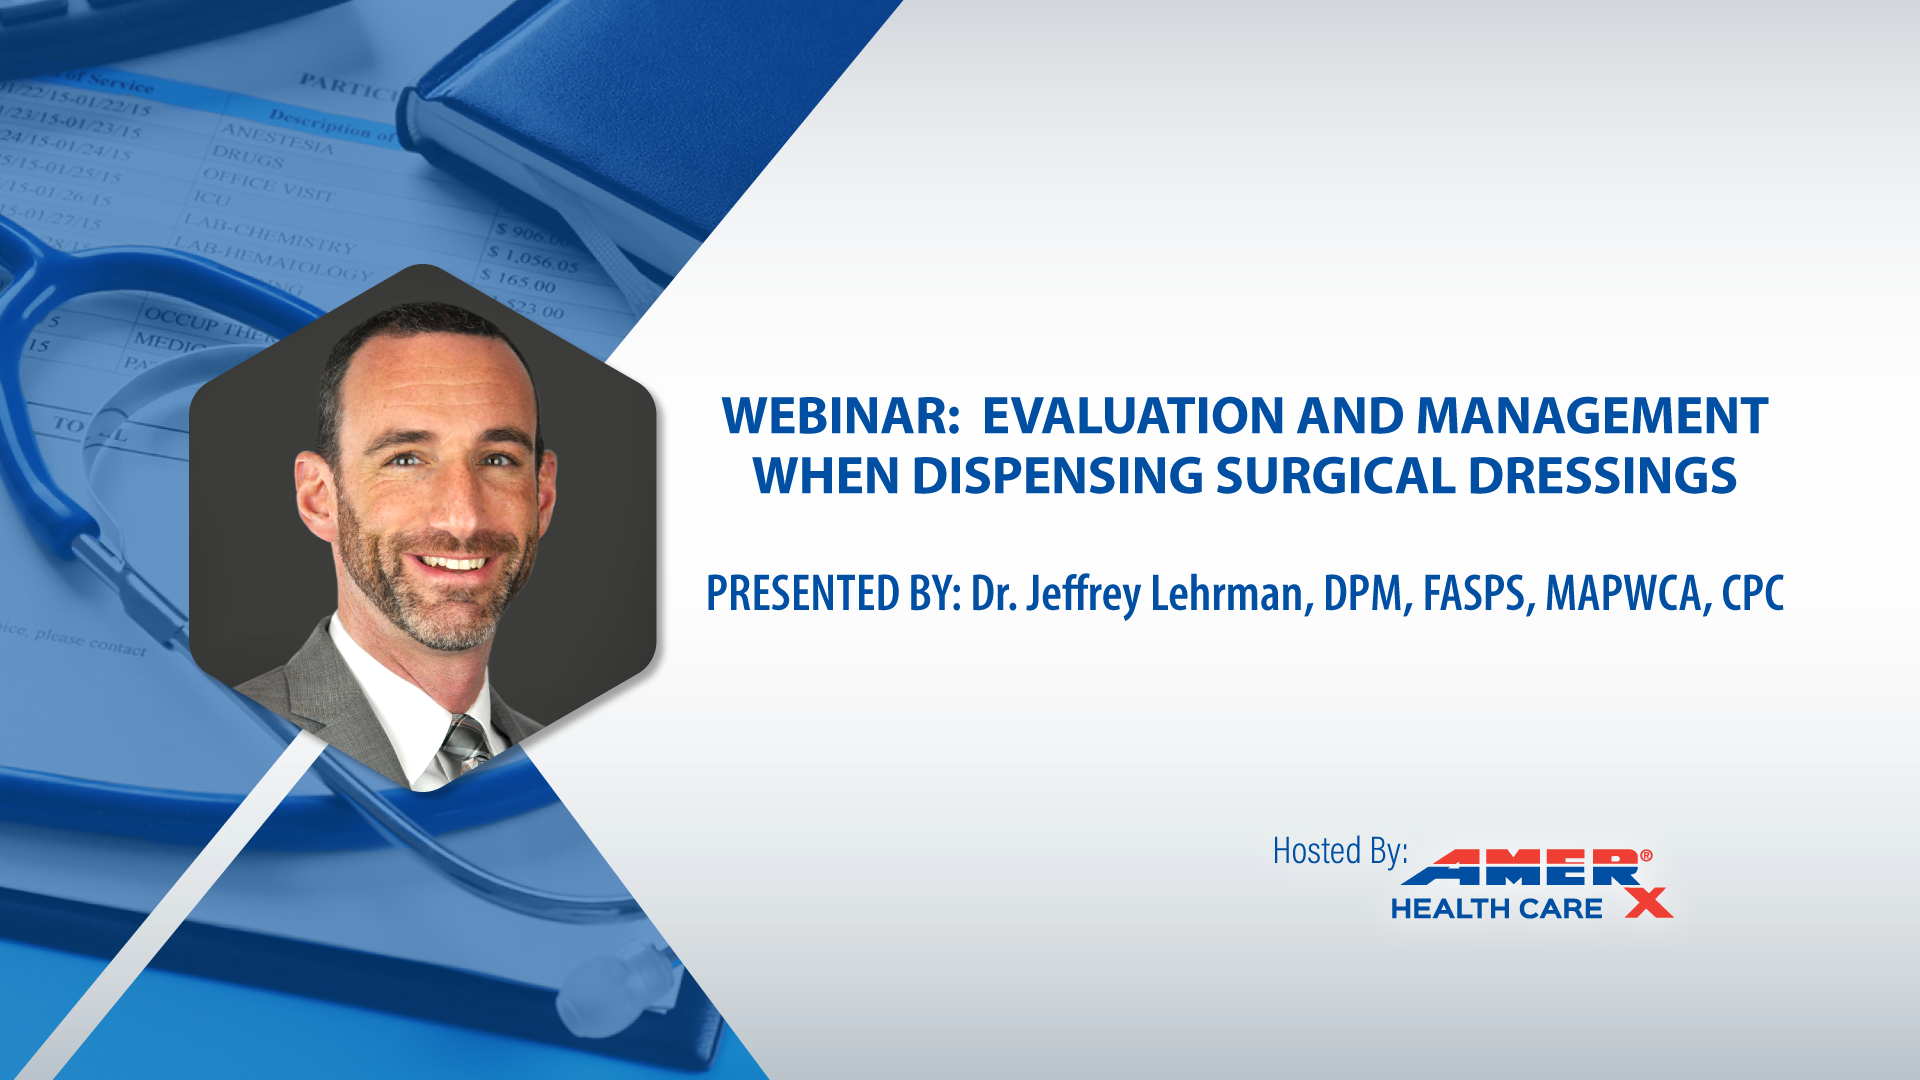 Webinar: Evaluation and Management When Dispensing Surgical Dressings